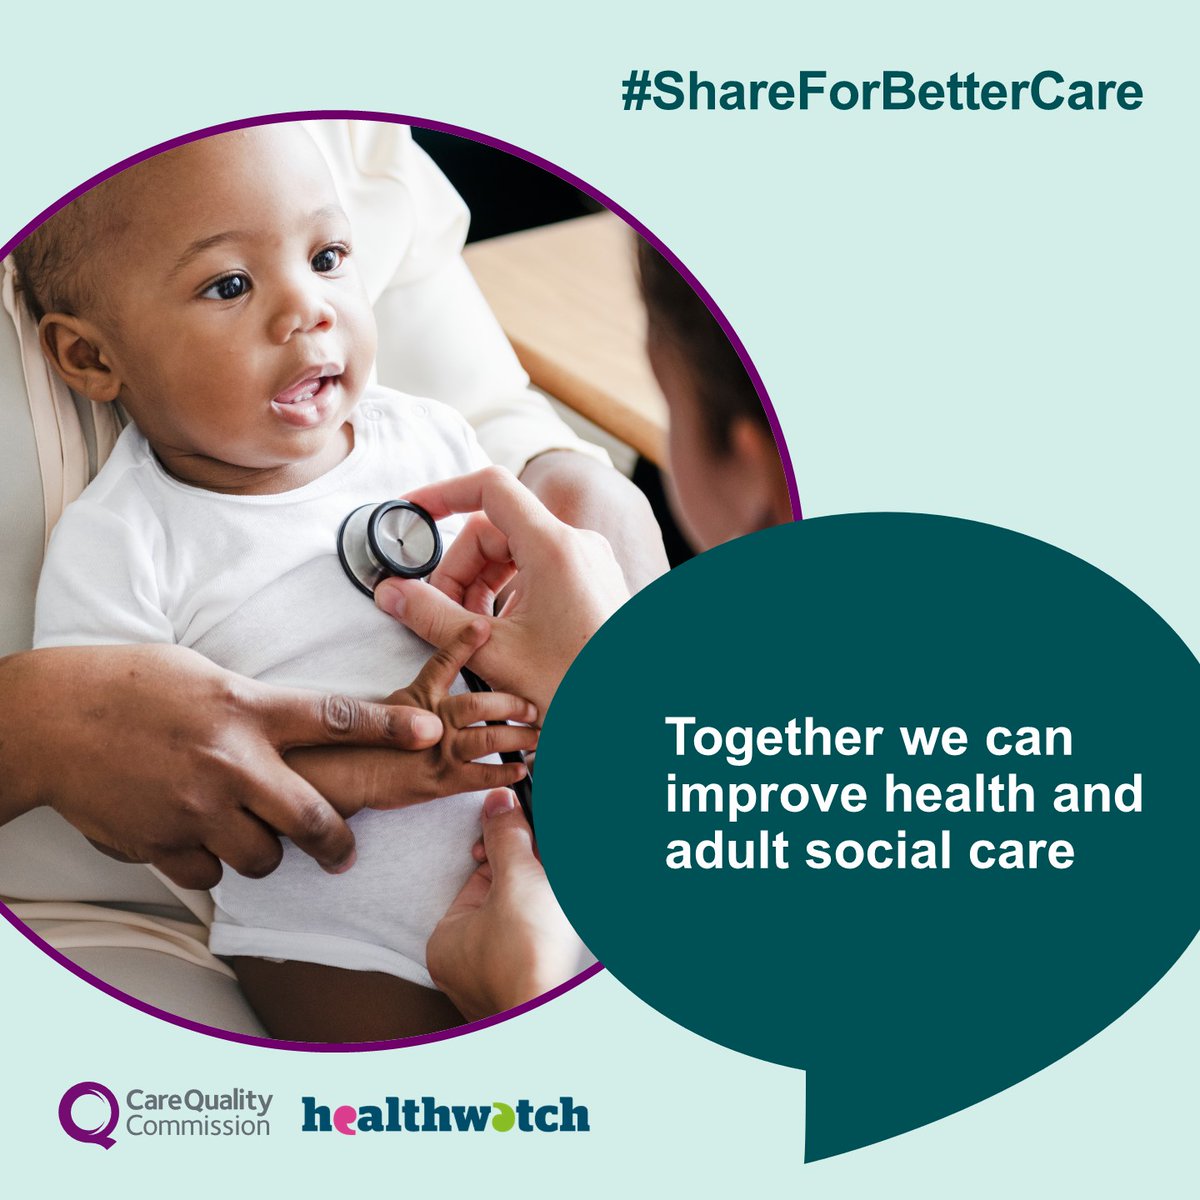 Share for Better Care: your feedback helps improve health and care services. Share your care experiences now by visiting 🔽 ow.ly/Af6650QT5kq #ShareForBetterCare